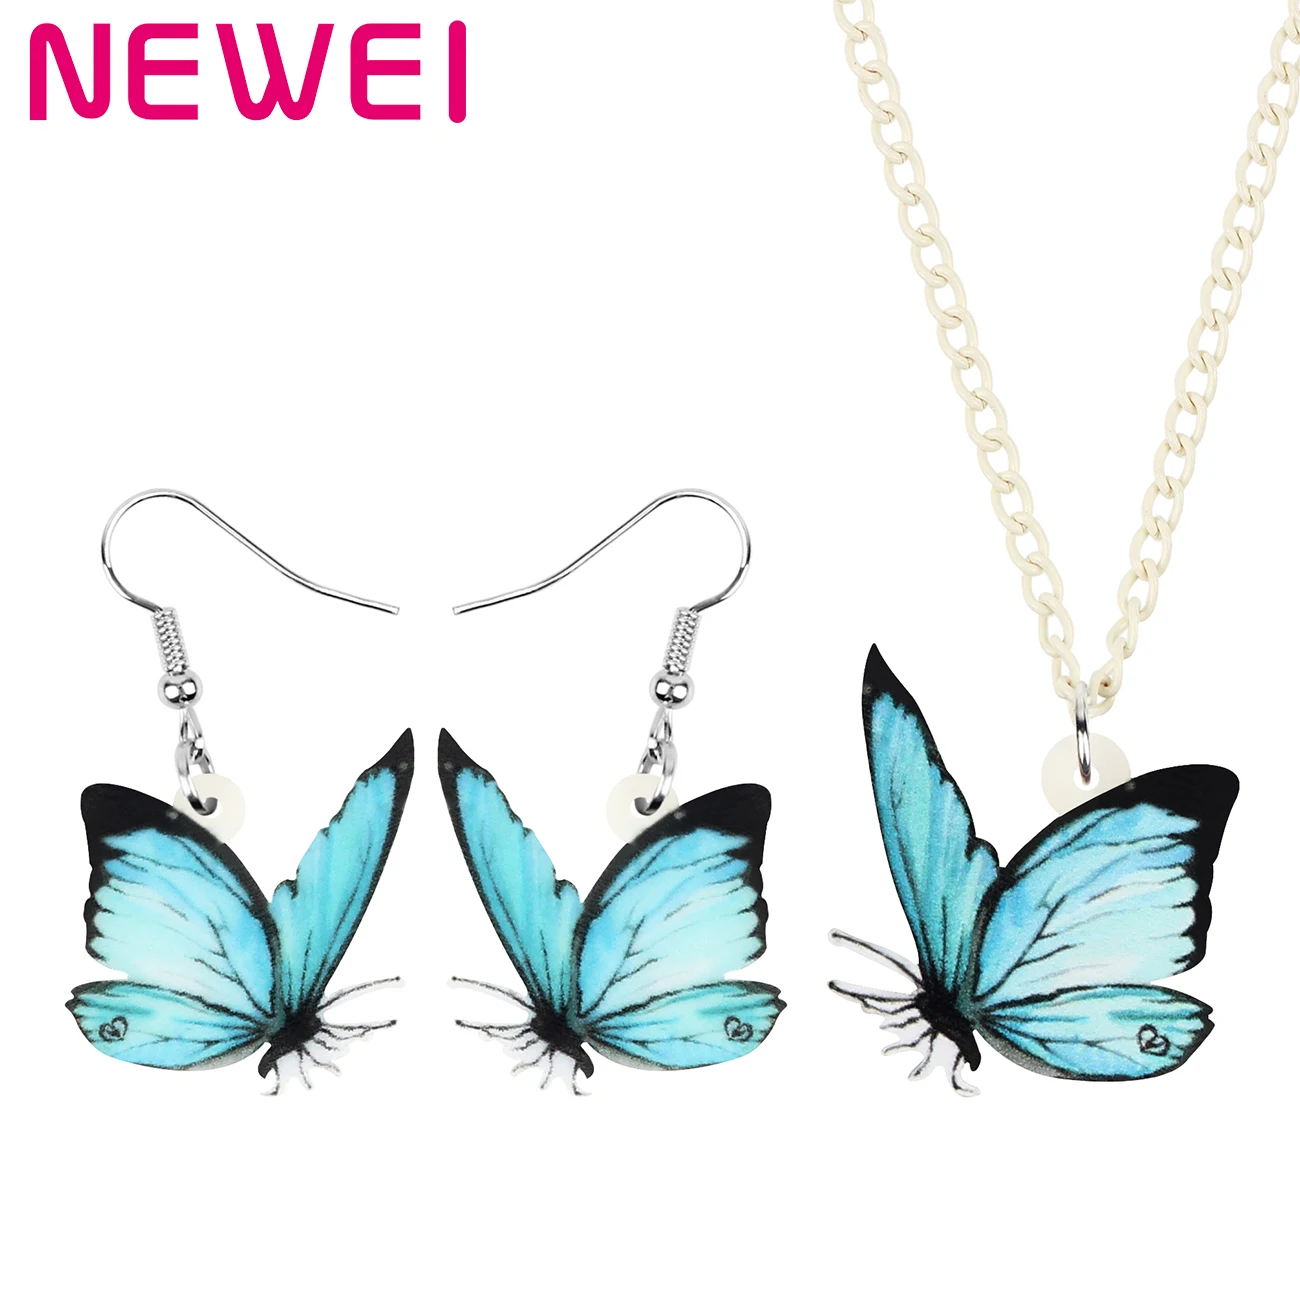 

Newei Acrylic Cute Blue Morpho Butterfly Jewelry Sets Printing Animal Insect Necklace Earrings For Women Girl Kid Festival Gifts